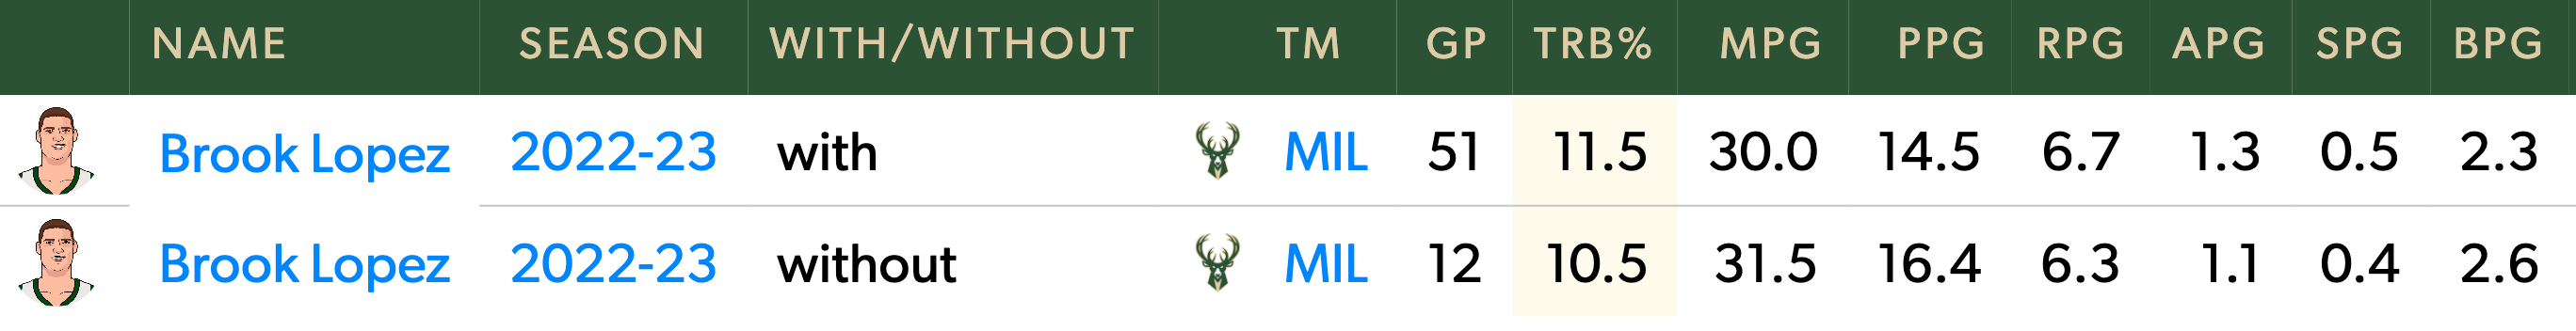 Lopez's rebounding rate with and without Giannis this season.